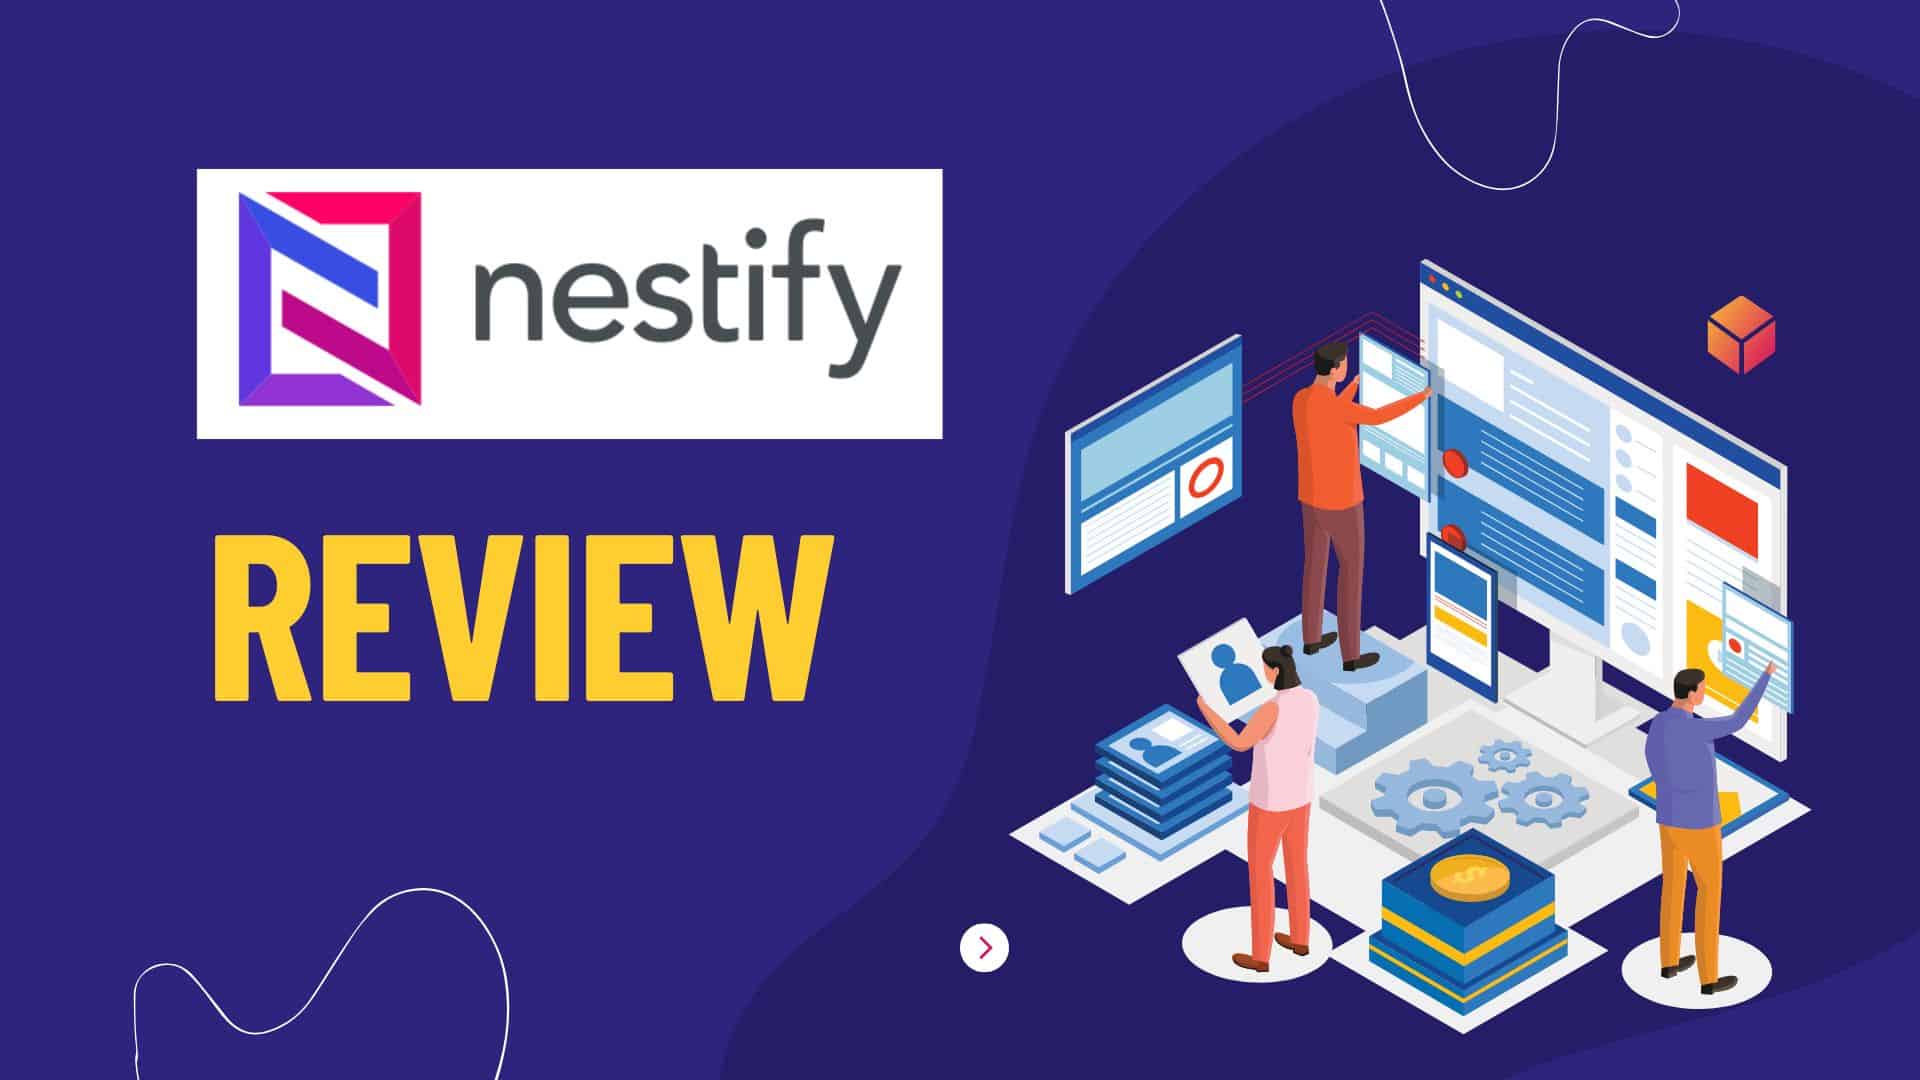 nestify review